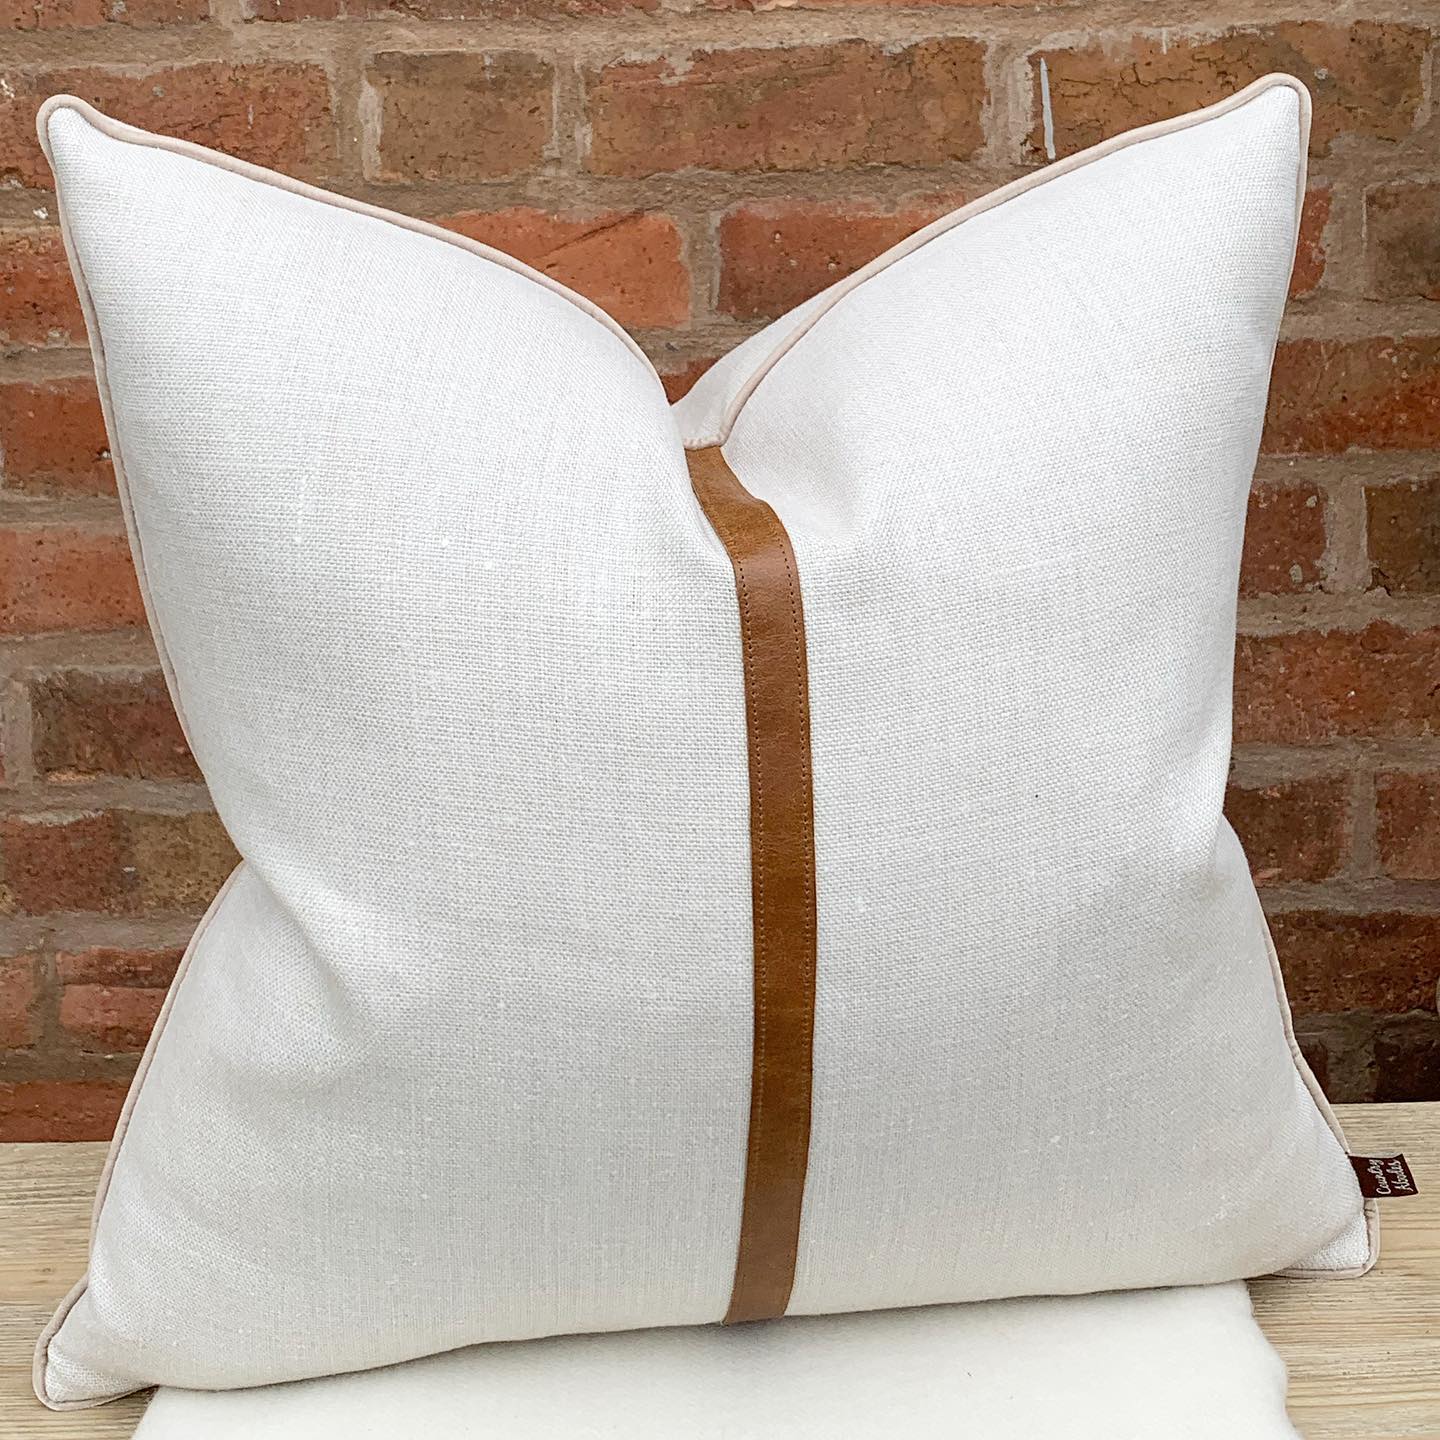 Peony and Sage grain sack cushion with leather detail